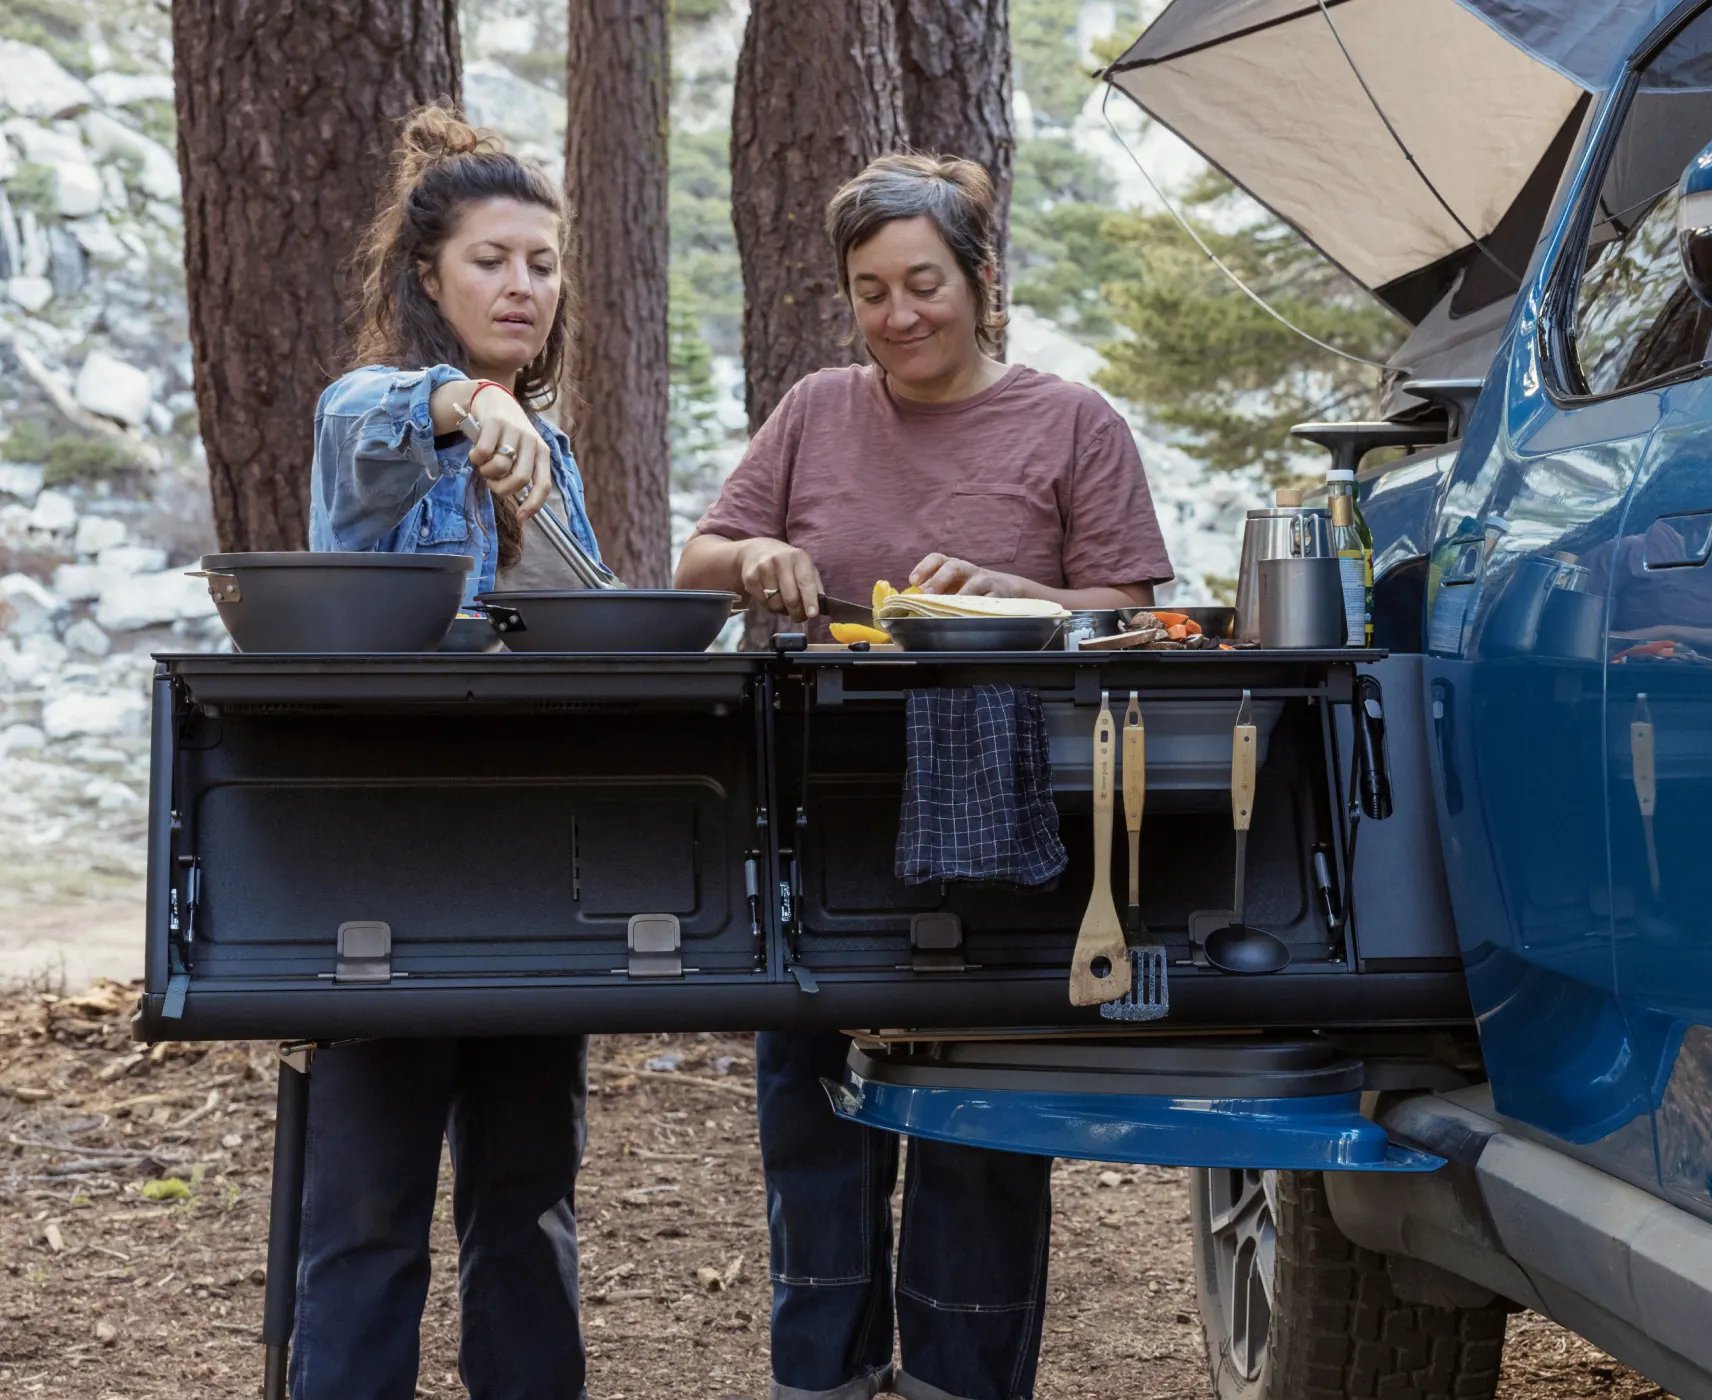 https://s1.cdn.autoevolution.com/images/news/gallery/rivian-r1s-camp-kitchen-trademark-filed-with-the-uspto-might-not-seat-seven-anymore_14.jpg